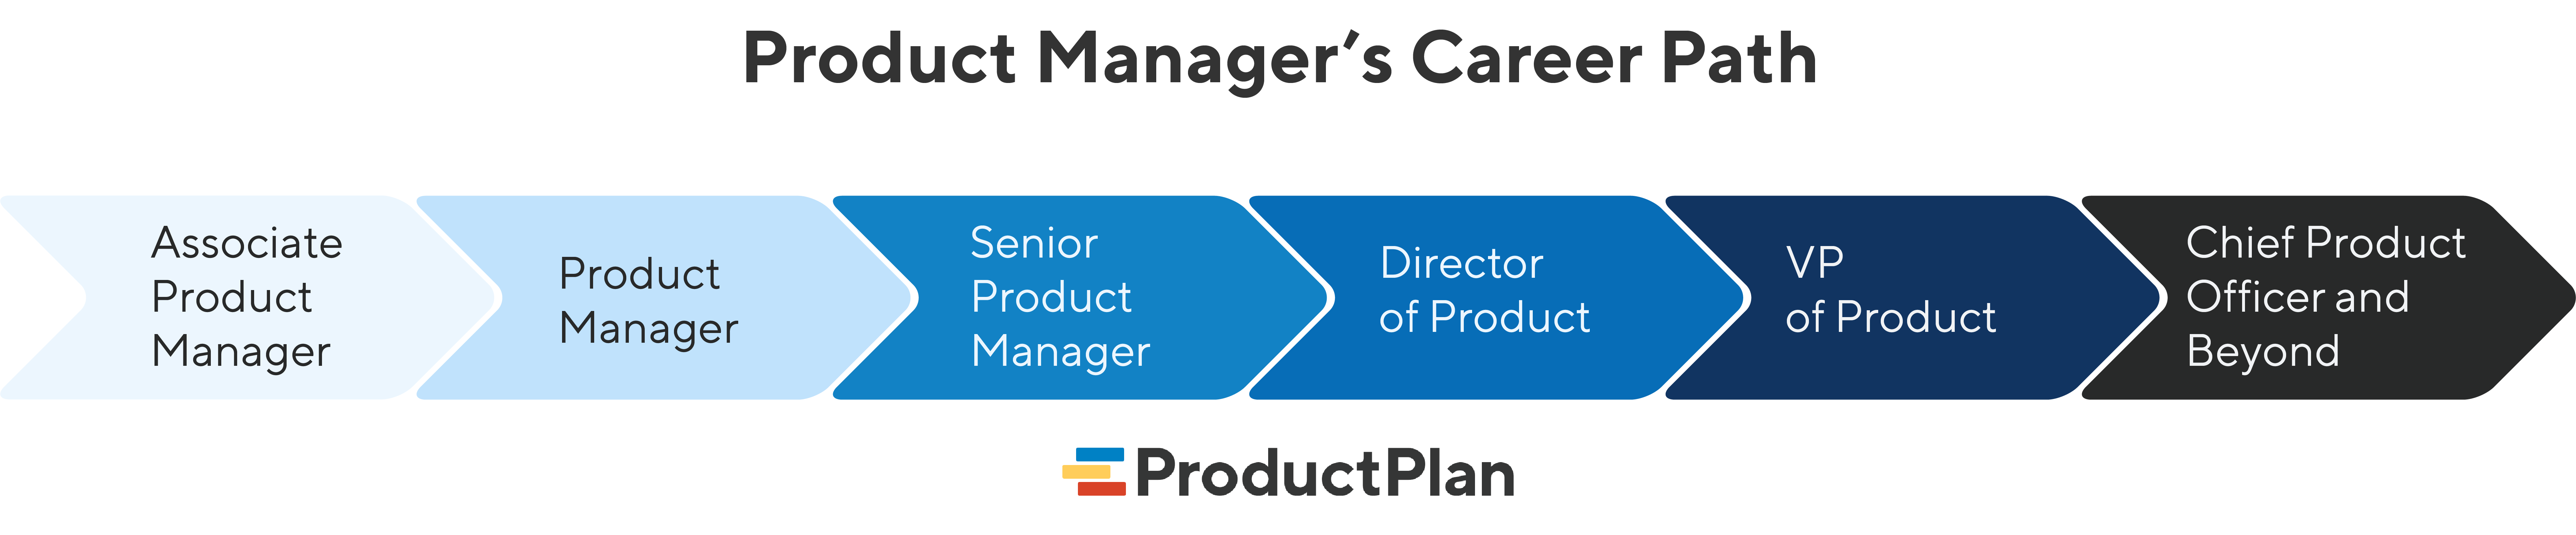 The Product Manager Career Path What does it look like